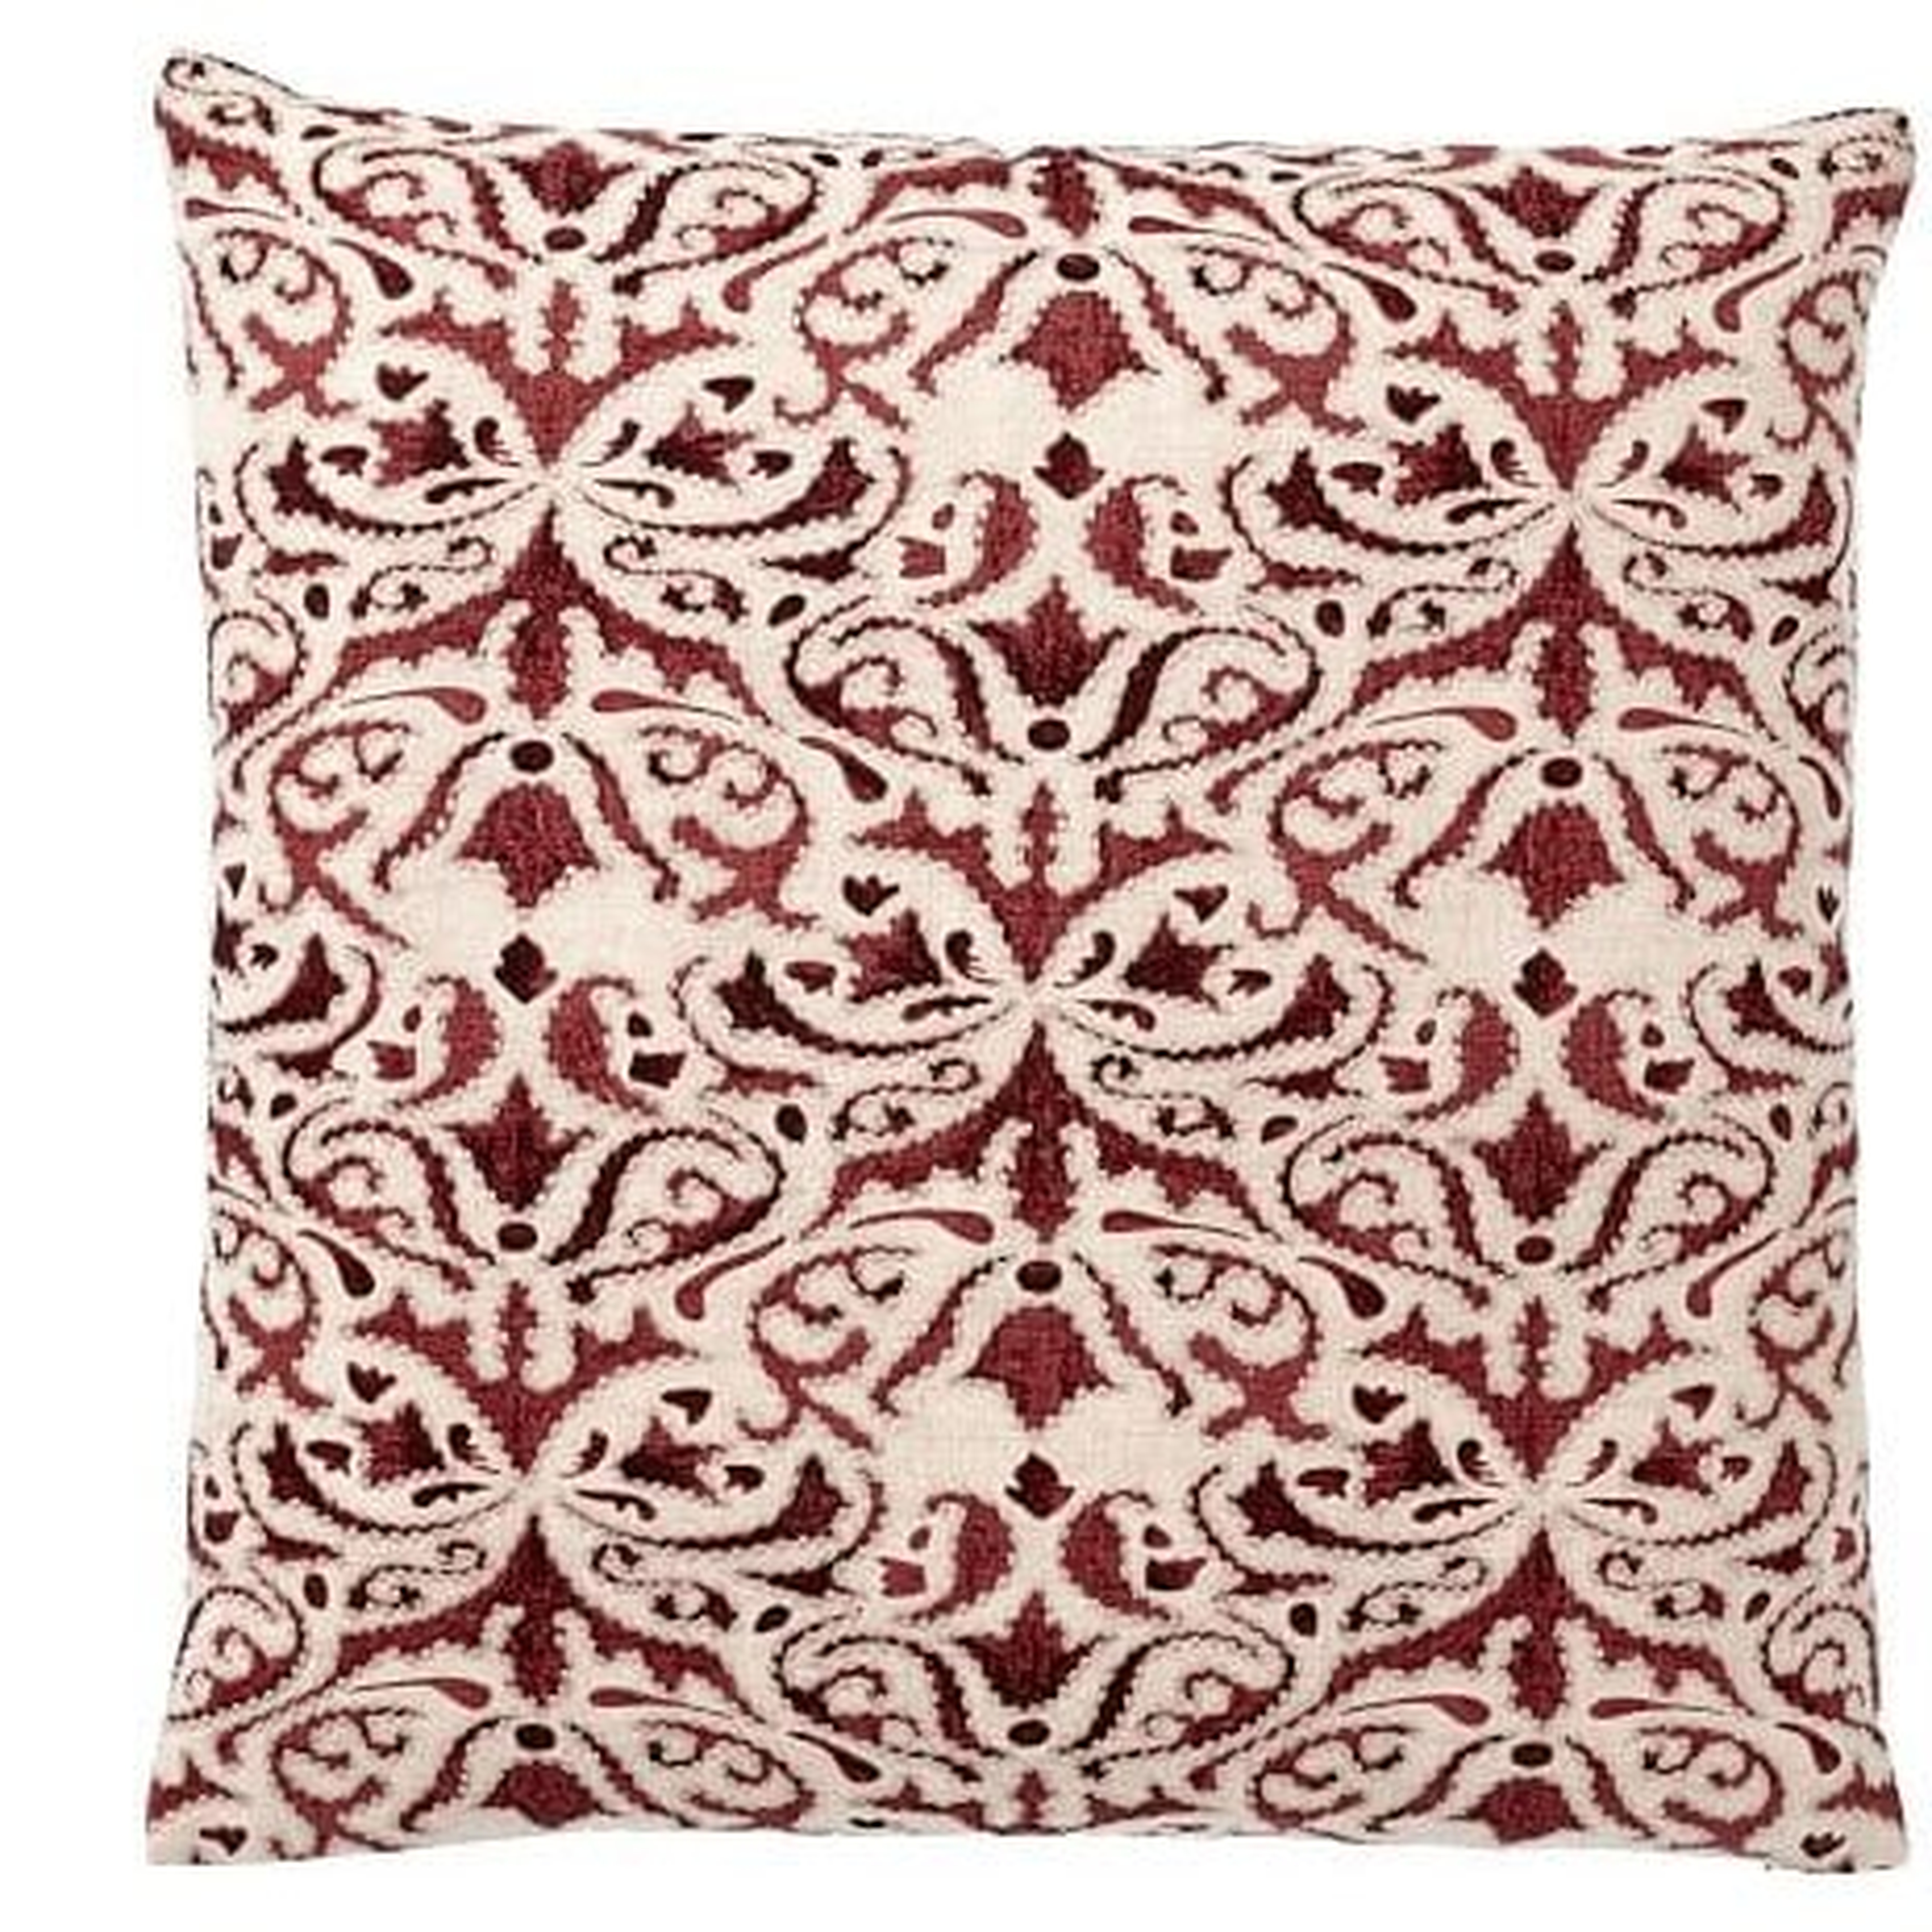 REILLEY EMBROIDERED PILLOW COVERS-Sumac - Pottery Barn